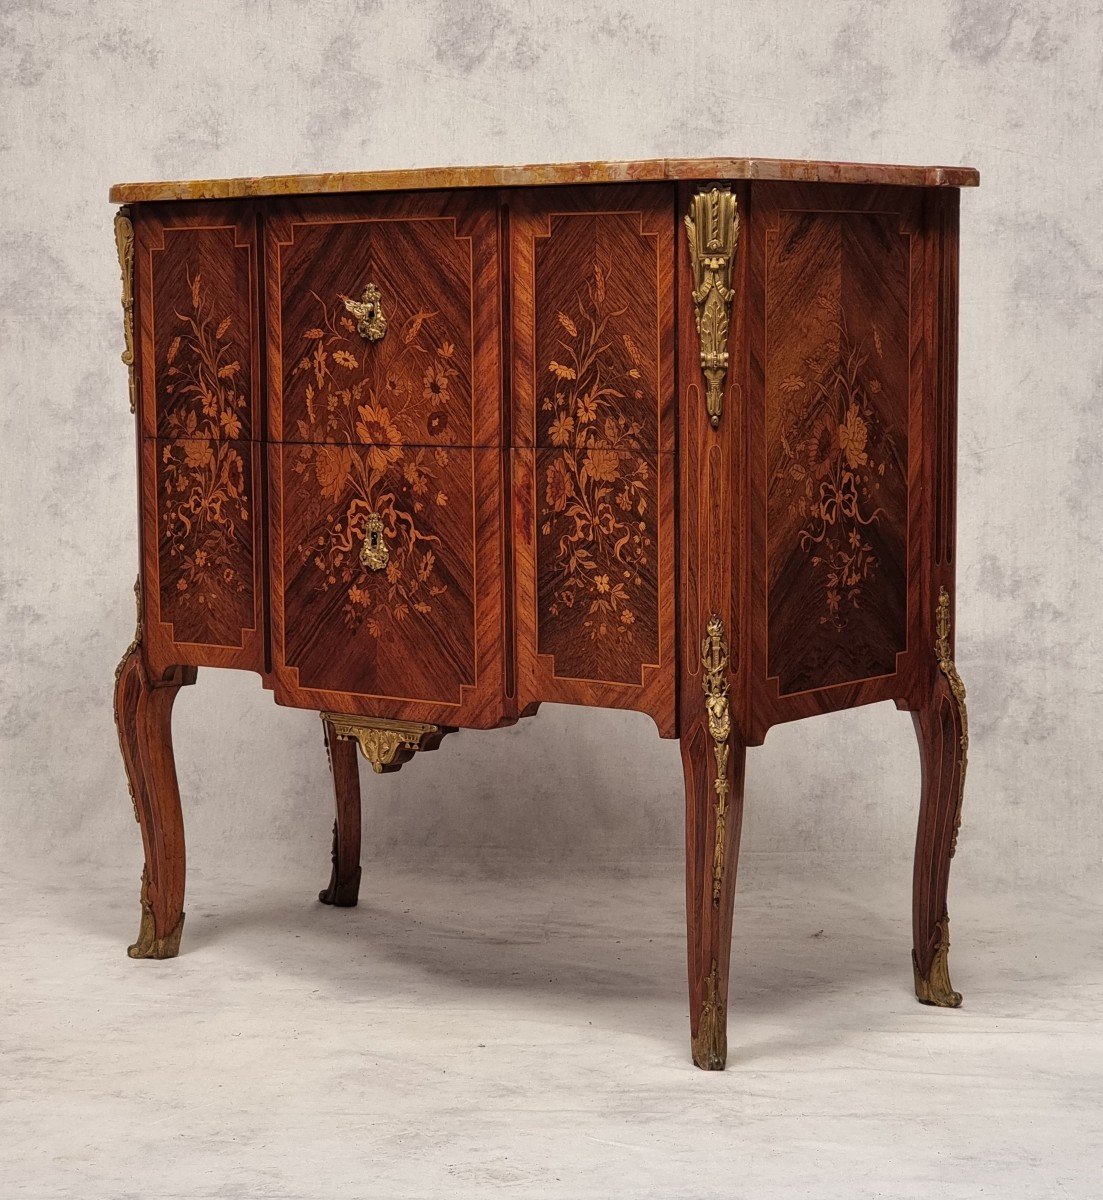 Transition Style Commode Napoleon III Period - Floral Marquetry - Rosewood - 19th